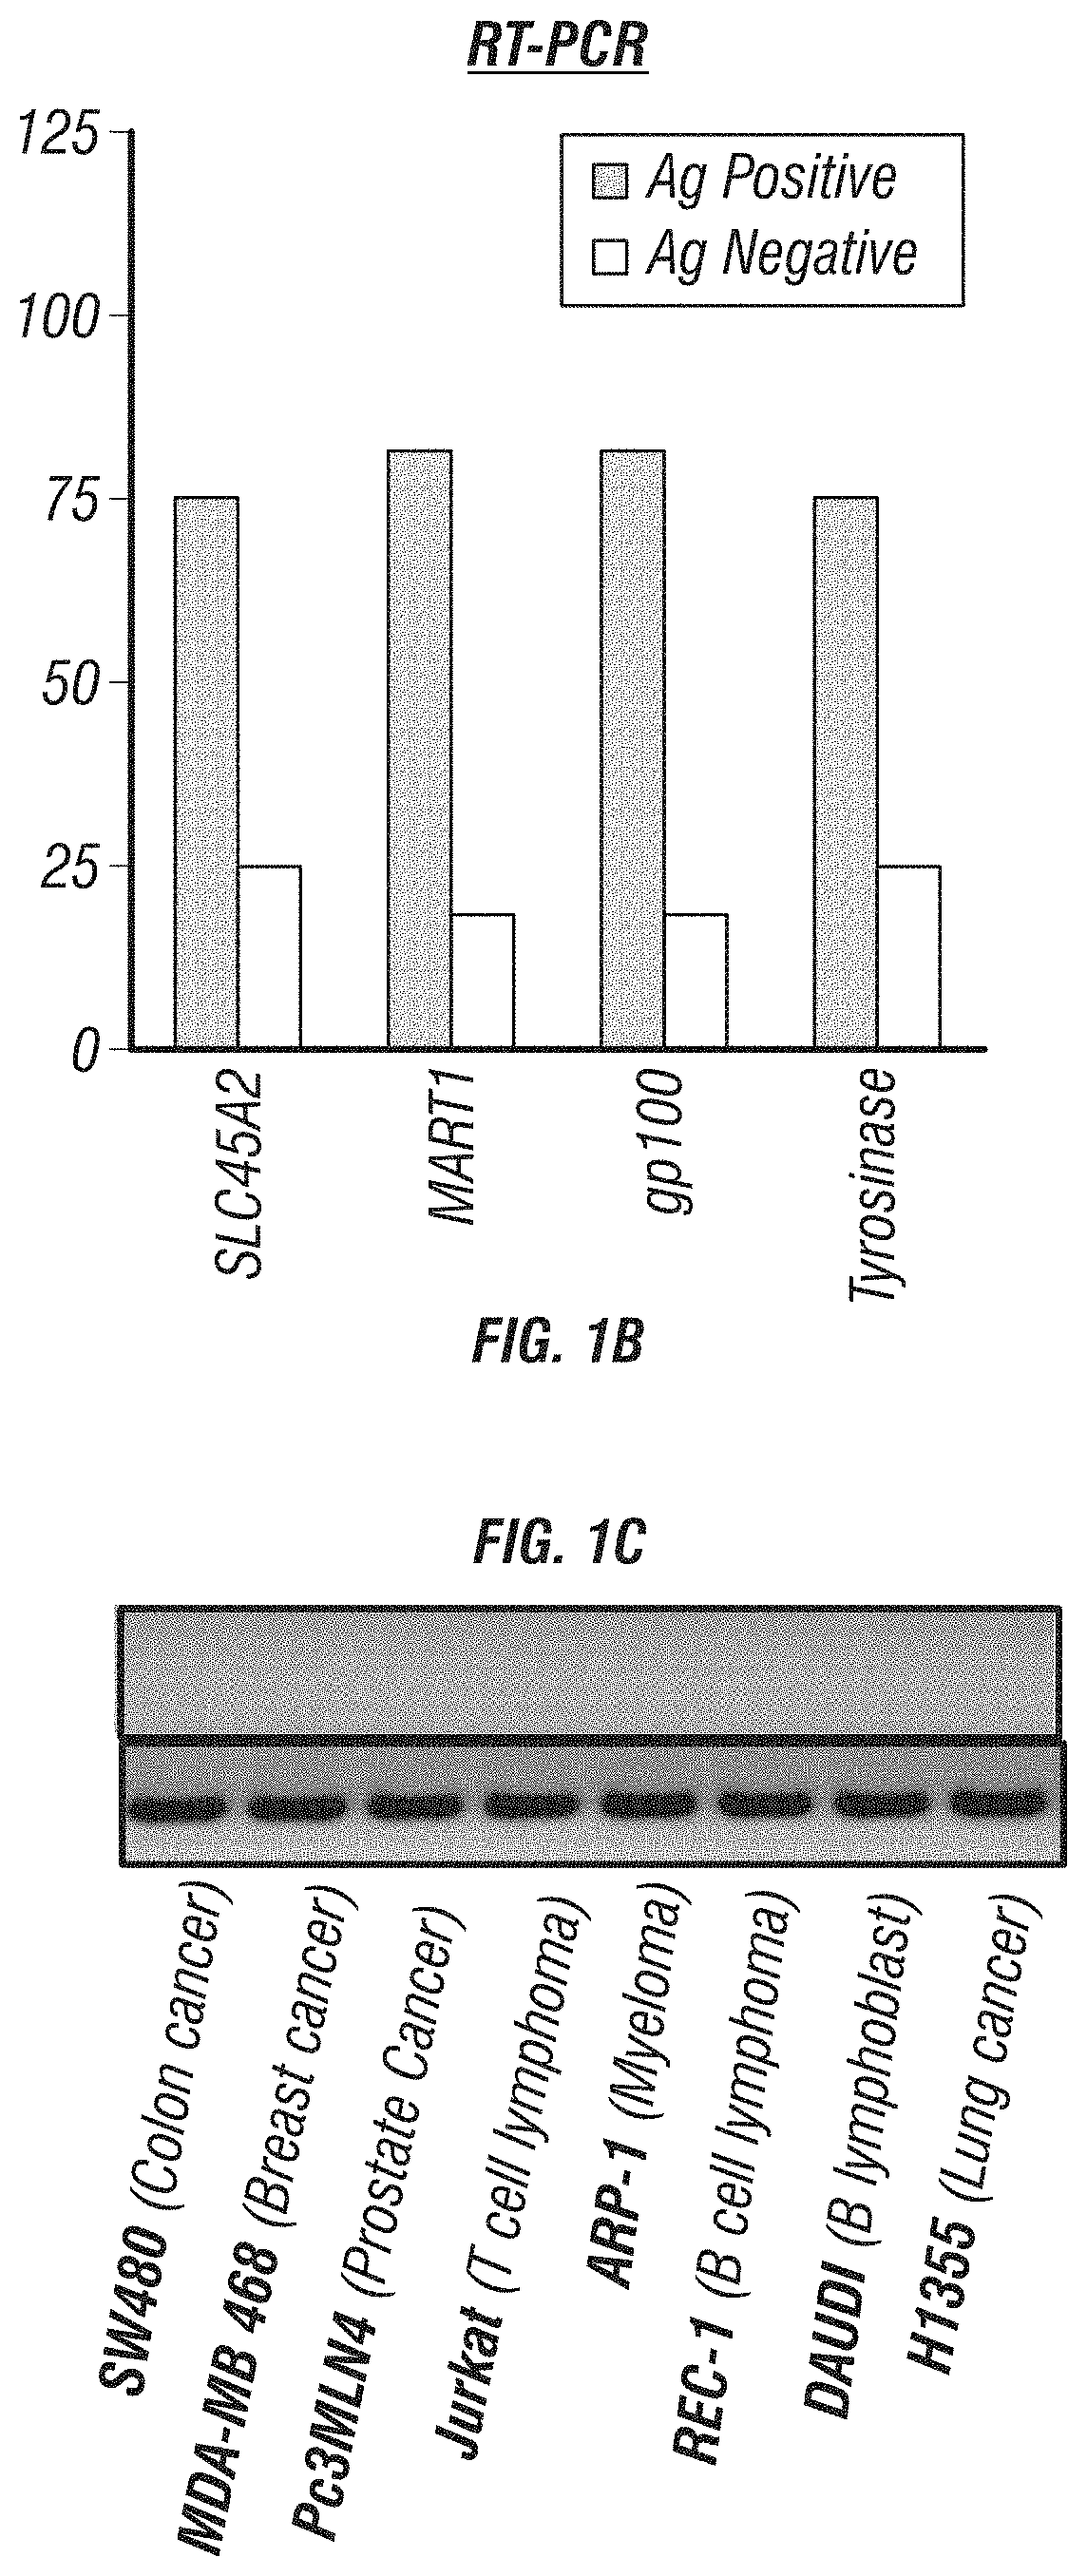 Slc45a2 peptides for immunotherapy